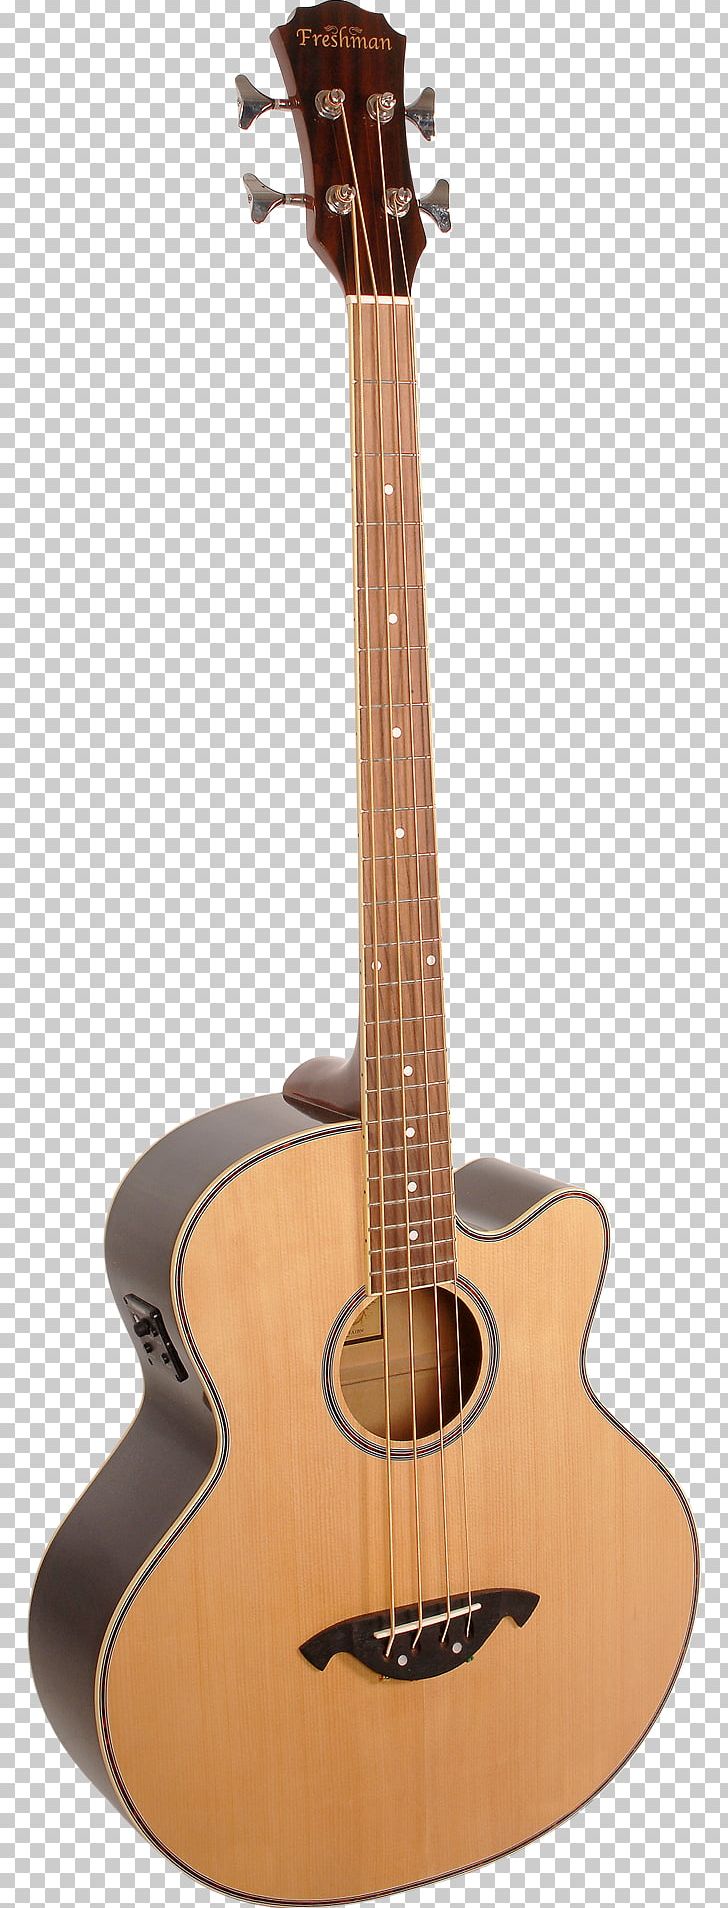 Epiphone Rivoli Acoustic Bass Guitar Acoustic Guitar PNG, Clipart, Cuatro, Cutaway, Double Bass, Guitar Accessory, Musical Instrument Free PNG Download